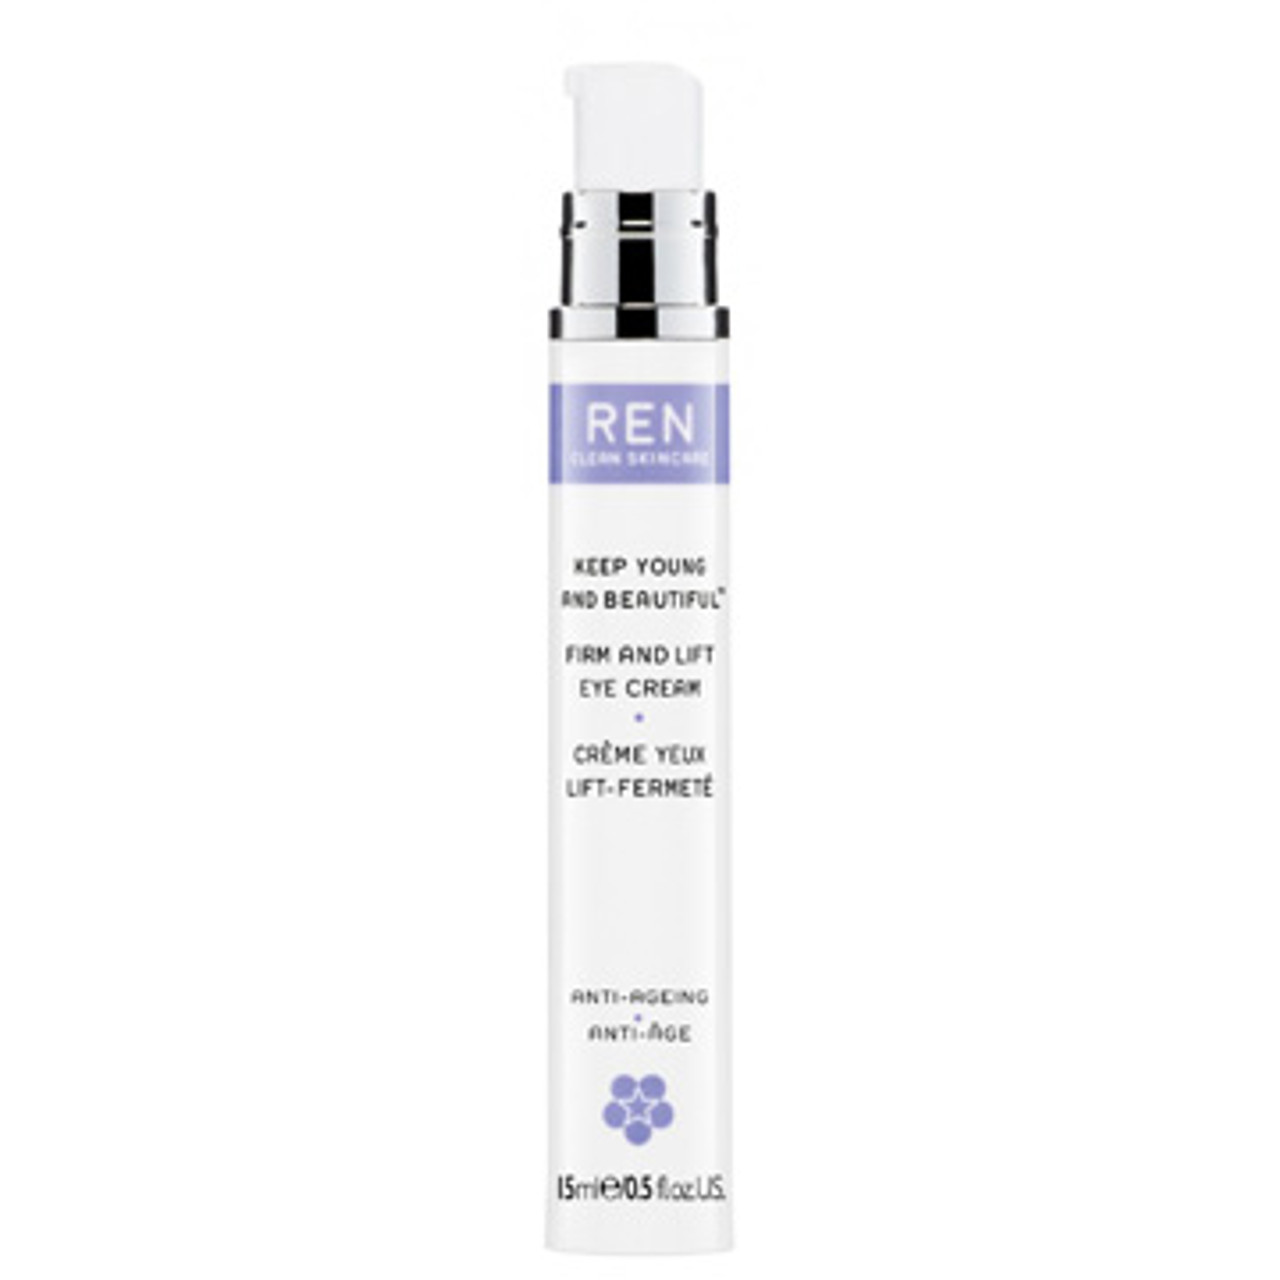 REN Keep Young and Beautiful Firm and Lift Eye Cream - 0.5 oz (3389)